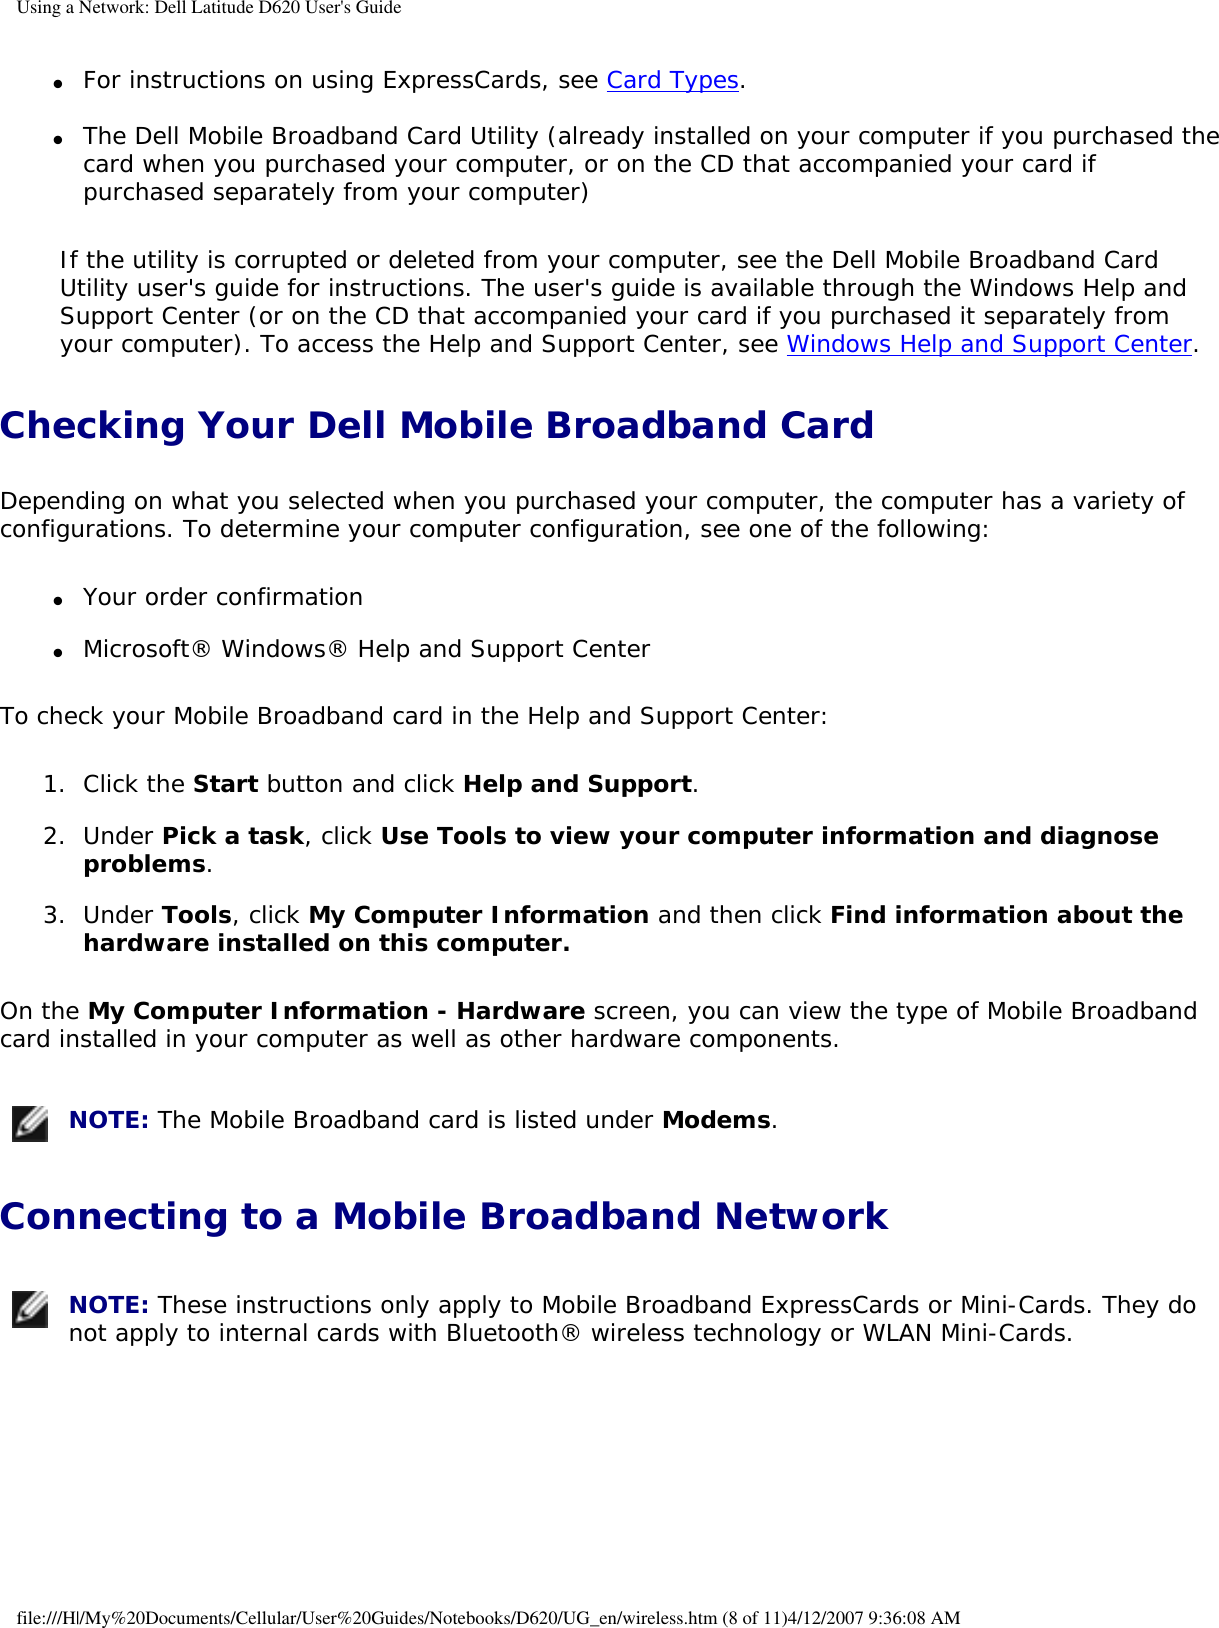 Using a Network: Dell Latitude D620 User&apos;s Guide ●     For instructions on using ExpressCards, see Card Types.   ●     The Dell Mobile Broadband Card Utility (already installed on your computer if you purchased the card when you purchased your computer, or on the CD that accompanied your card if purchased separately from your computer)  If the utility is corrupted or deleted from your computer, see the Dell Mobile Broadband Card Utility user&apos;s guide for instructions. The user&apos;s guide is available through the Windows Help and Support Center (or on the CD that accompanied your card if you purchased it separately from your computer). To access the Help and Support Center, see Windows Help and Support Center.Checking Your Dell Mobile Broadband CardDepending on what you selected when you purchased your computer, the computer has a variety of configurations. To determine your computer configuration, see one of the following:●     Your order confirmation  ●     Microsoft® Windows® Help and Support Center  To check your Mobile Broadband card in the Help and Support Center:1.  Click the Start button and click Help and Support.   2.  Under Pick a task, click Use Tools to view your computer information and diagnose problems.   3.  Under Tools, click My Computer Information and then click Find information about the hardware installed on this computer.   On the My Computer Information - Hardware screen, you can view the type of Mobile Broadband card installed in your computer as well as other hardware components. NOTE: The Mobile Broadband card is listed under Modems.Connecting to a Mobile Broadband Network NOTE: These instructions only apply to Mobile Broadband ExpressCards or Mini-Cards. They do not apply to internal cards with Bluetooth® wireless technology or WLAN Mini-Cards.file:///H|/My%20Documents/Cellular/User%20Guides/Notebooks/D620/UG_en/wireless.htm (8 of 11)4/12/2007 9:36:08 AM